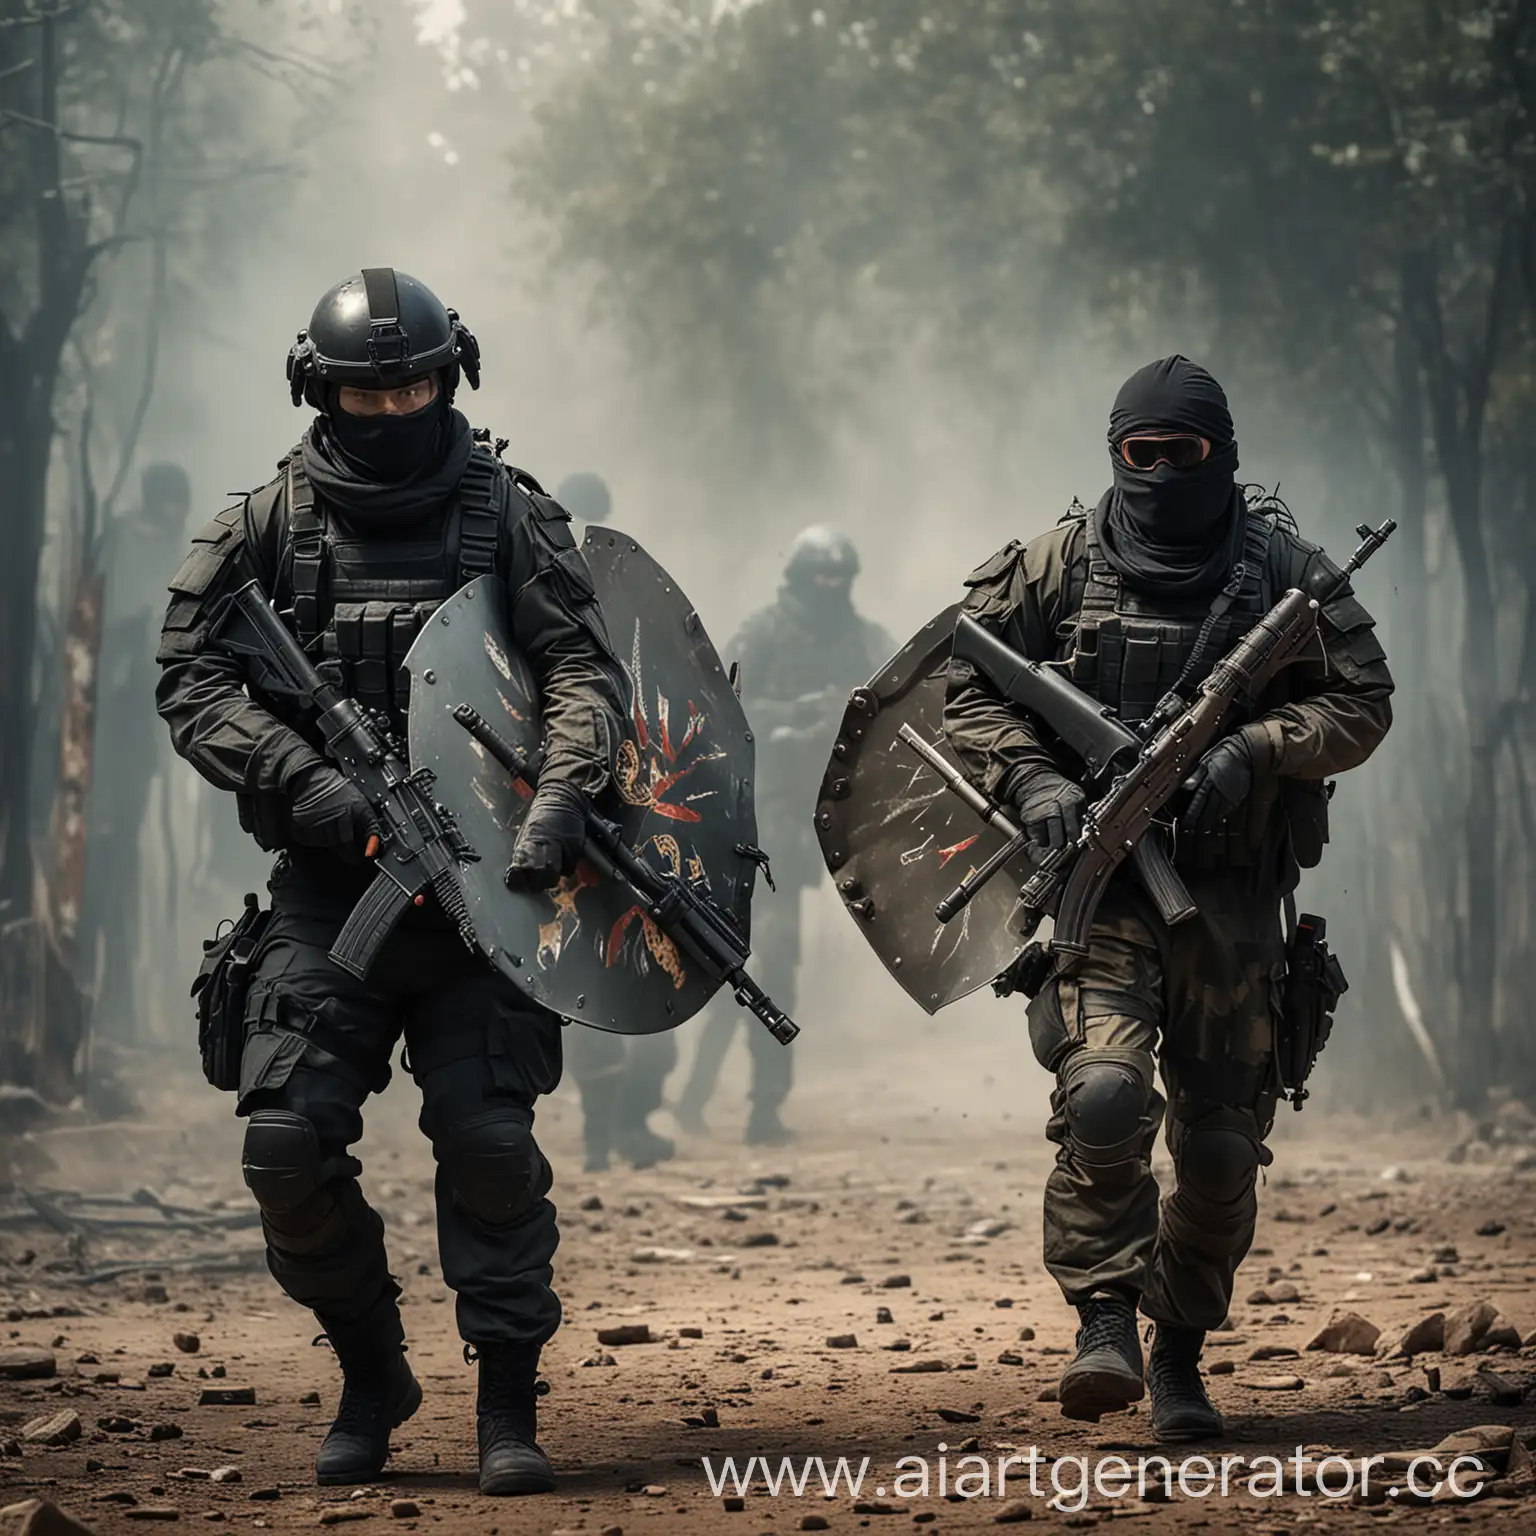 CounterTerrorism-Operation-Special-Forces-Engagement-with-Hostile-Militants